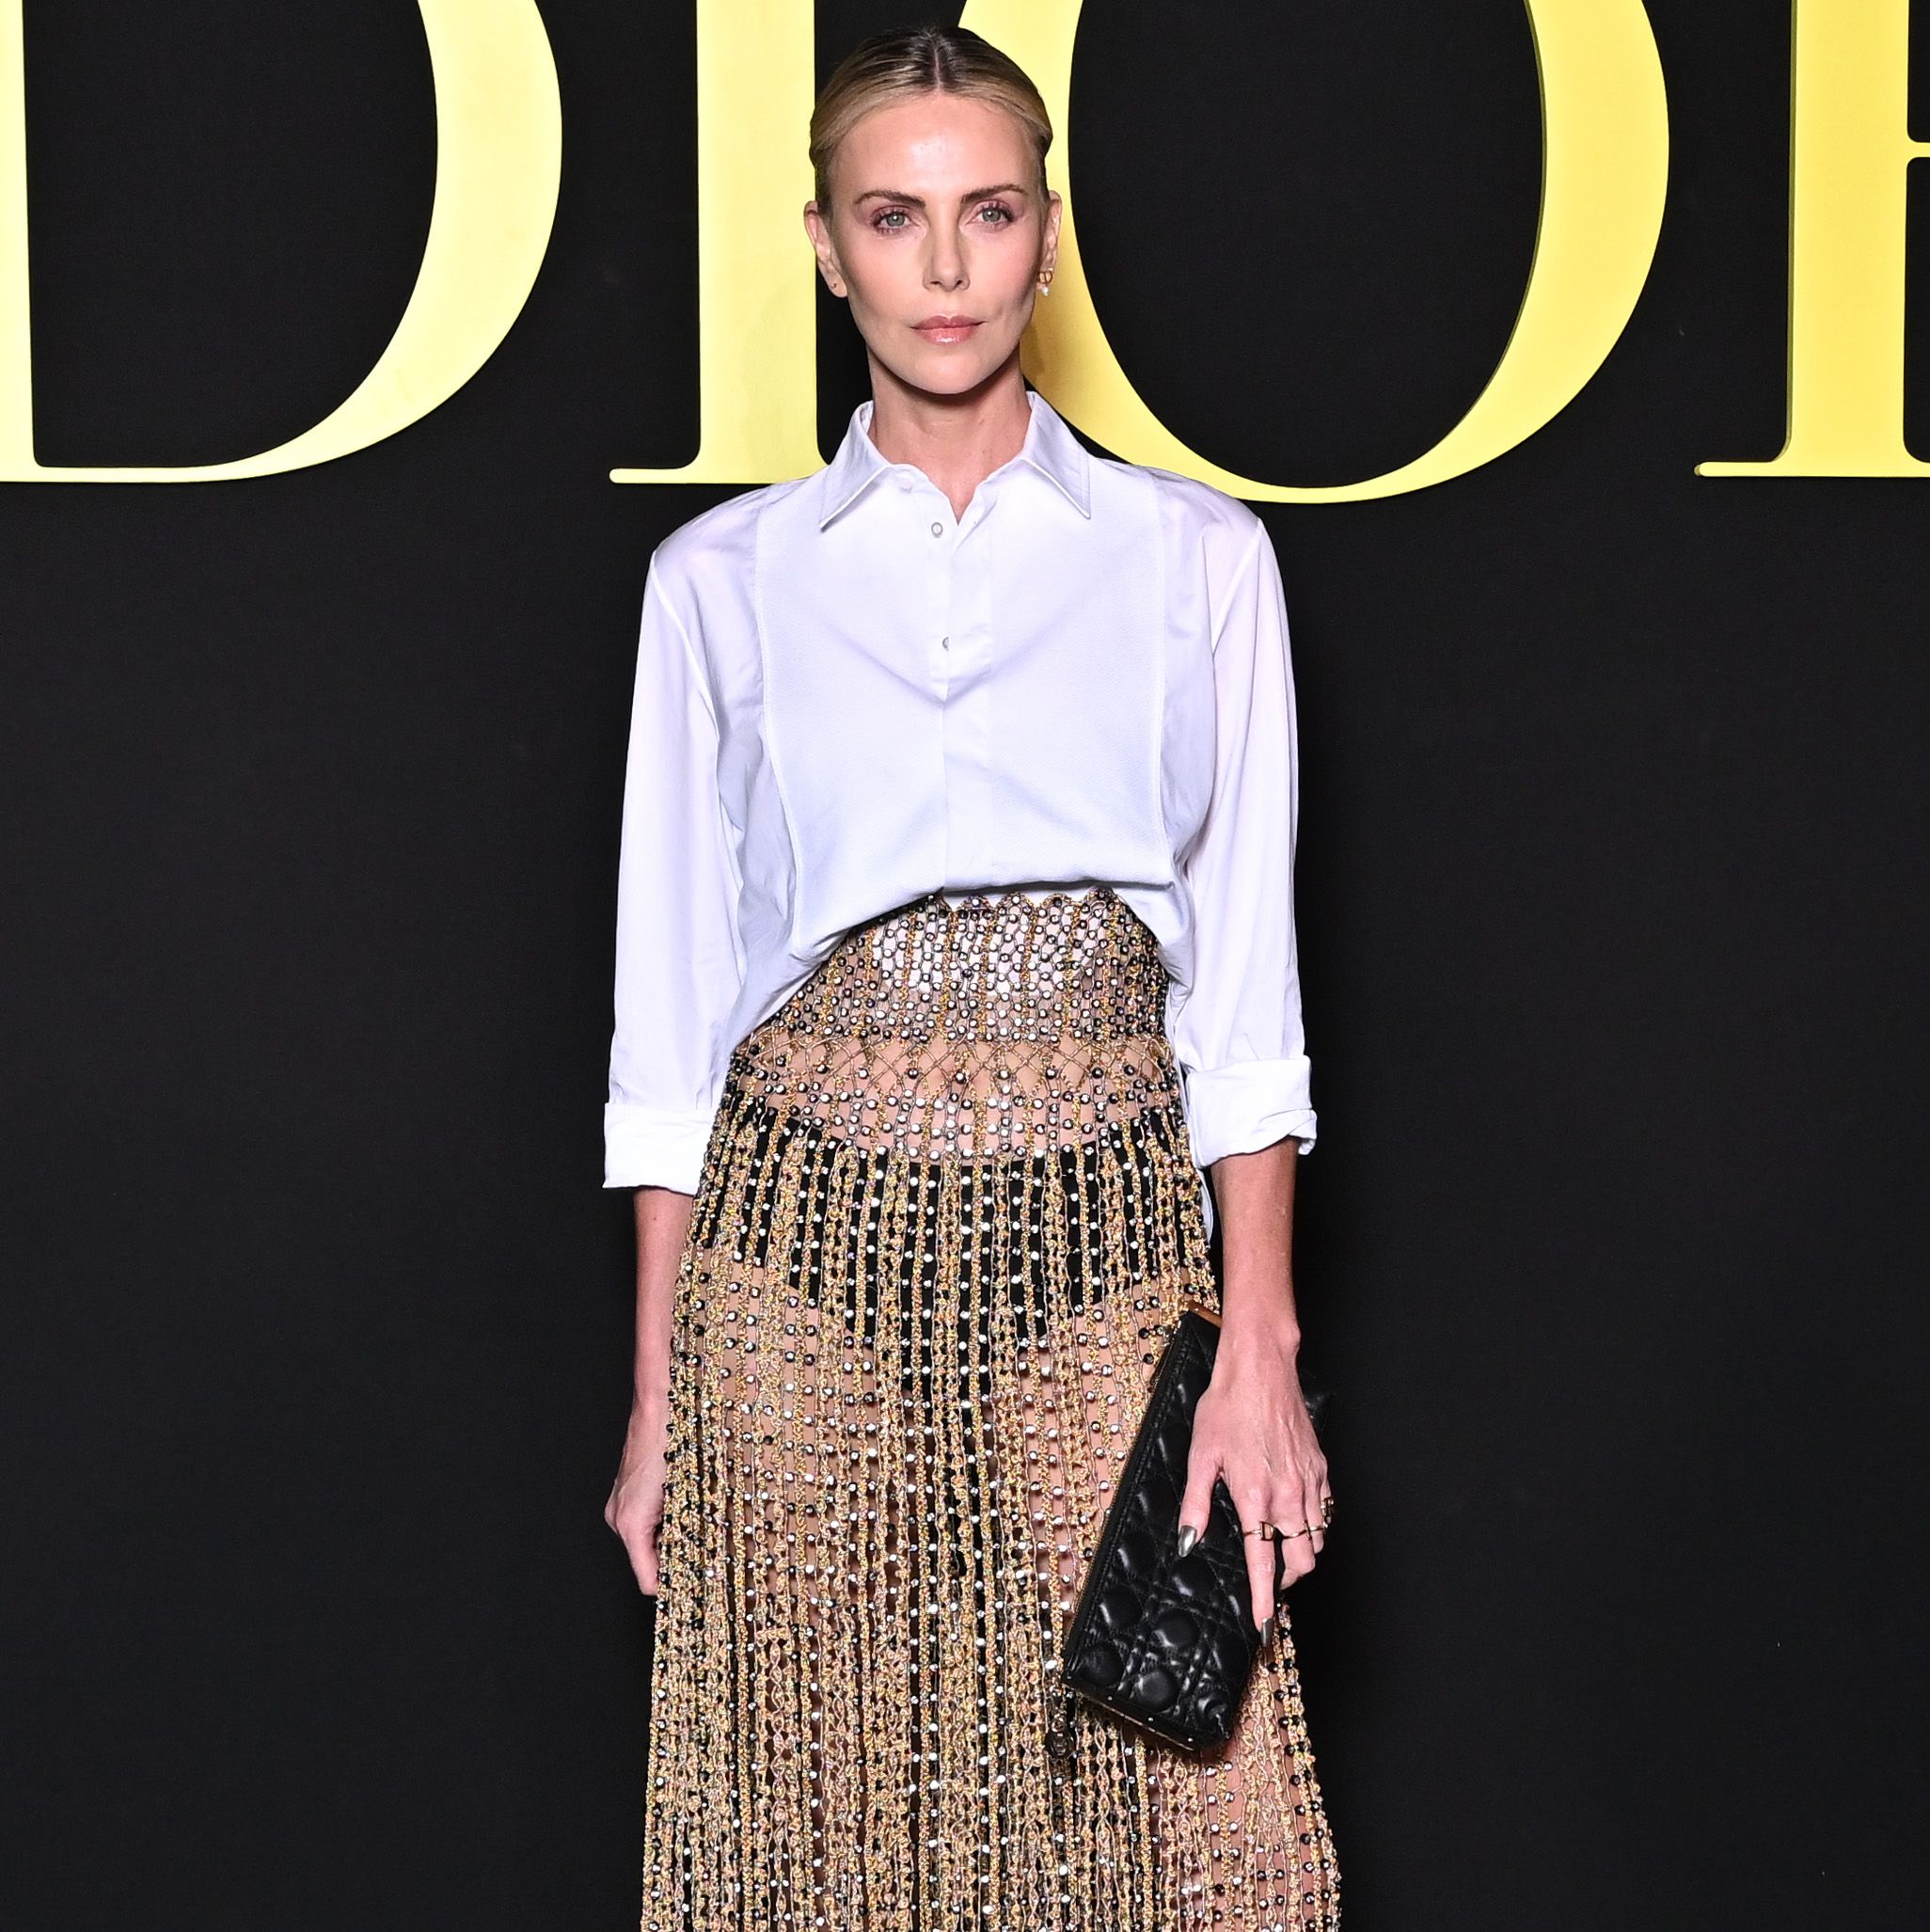 Charlize Theron Is a Total Blonde Bombshell in a Beaded See-Through Skirt